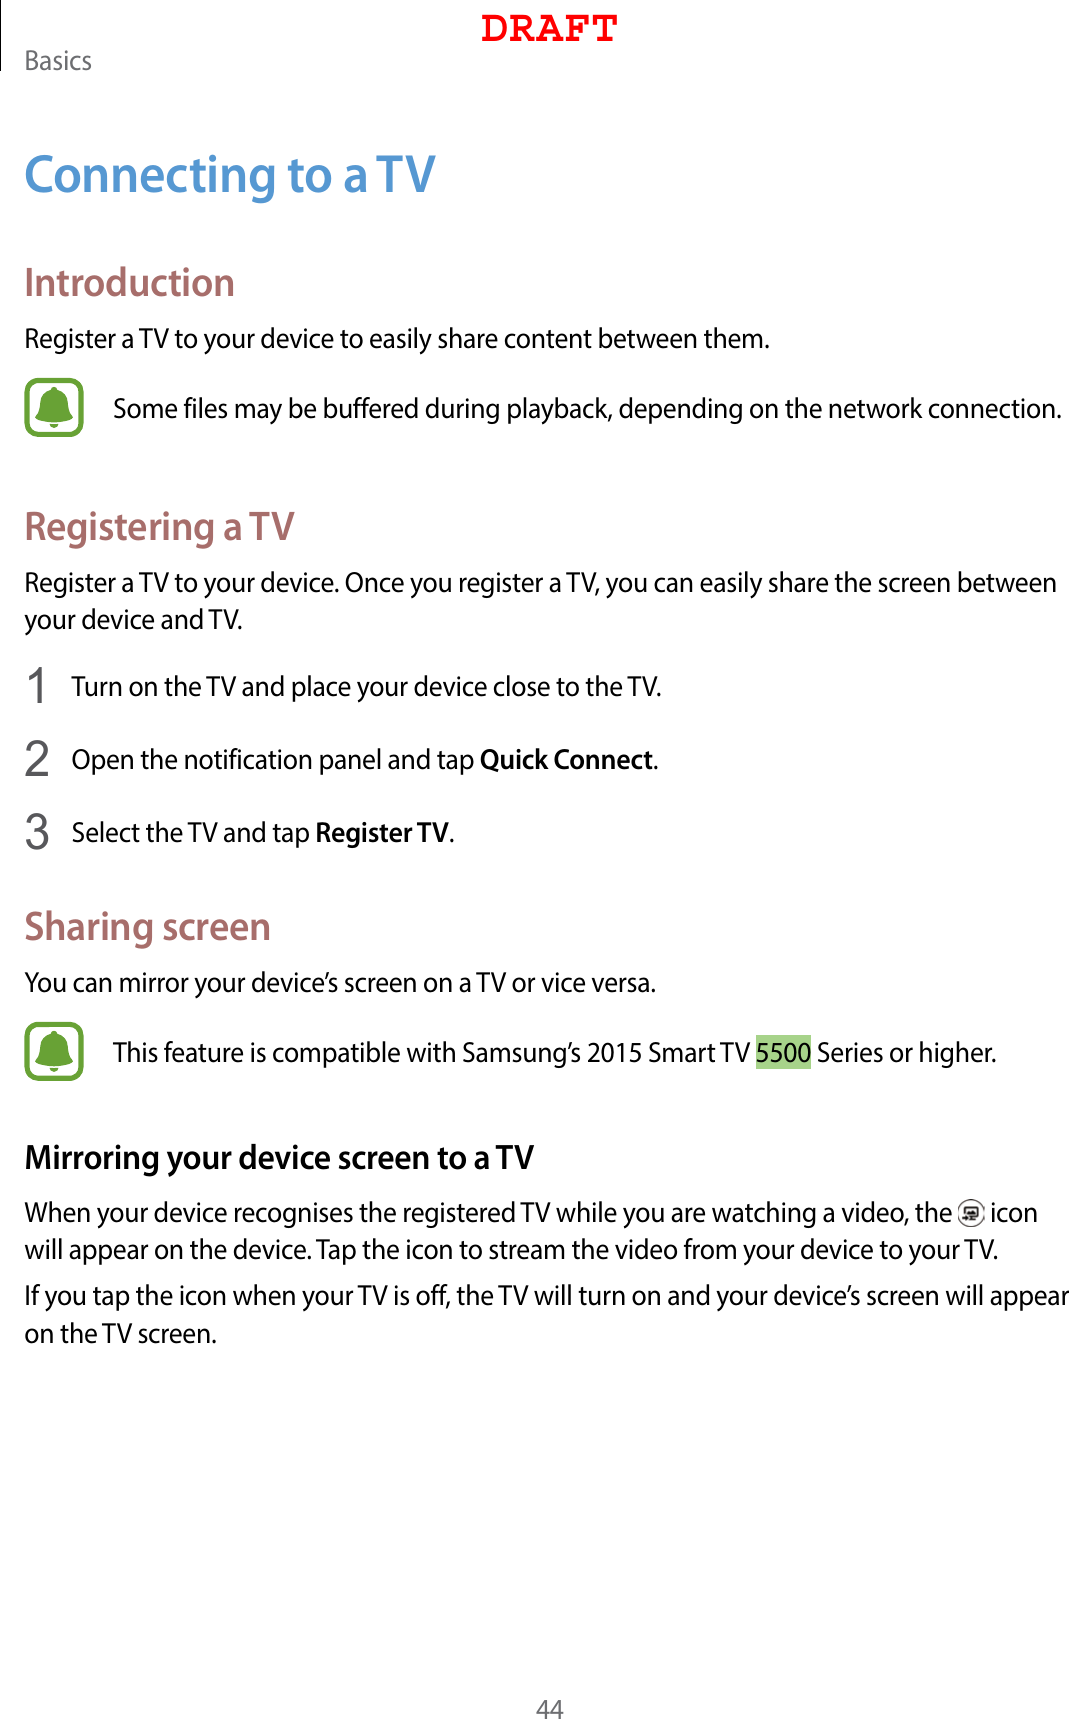 Basics44Connecting to a TVIntroductionRegister a TV to your device to easily share content between them.Some files may be buffered during playback, depending on the network connection.Registering a TVRegister a TV to your device. Once you register a TV, you can easily share the screen between your device and TV.1  Turn on the TV and place your device close to the TV.2  Open the notification panel and tap Quick Connect.3  Select the TV and tap Register TV.Sharing screenYou can mirror your device’s screen on a TV or vice versa.This feature is compatible with Samsung’s 2015 Smart TV 5500 Series or higher.Mirroring your device screen to a TVWhen your device recognises the registered TV while you are watching a video, the   icon will appear on the device. Tap the icon to stream the video from your device to your TV.If you tap the icon when your TV is off, the TV will turn on and your device’s screen will appear on the TV screen.DRAFT